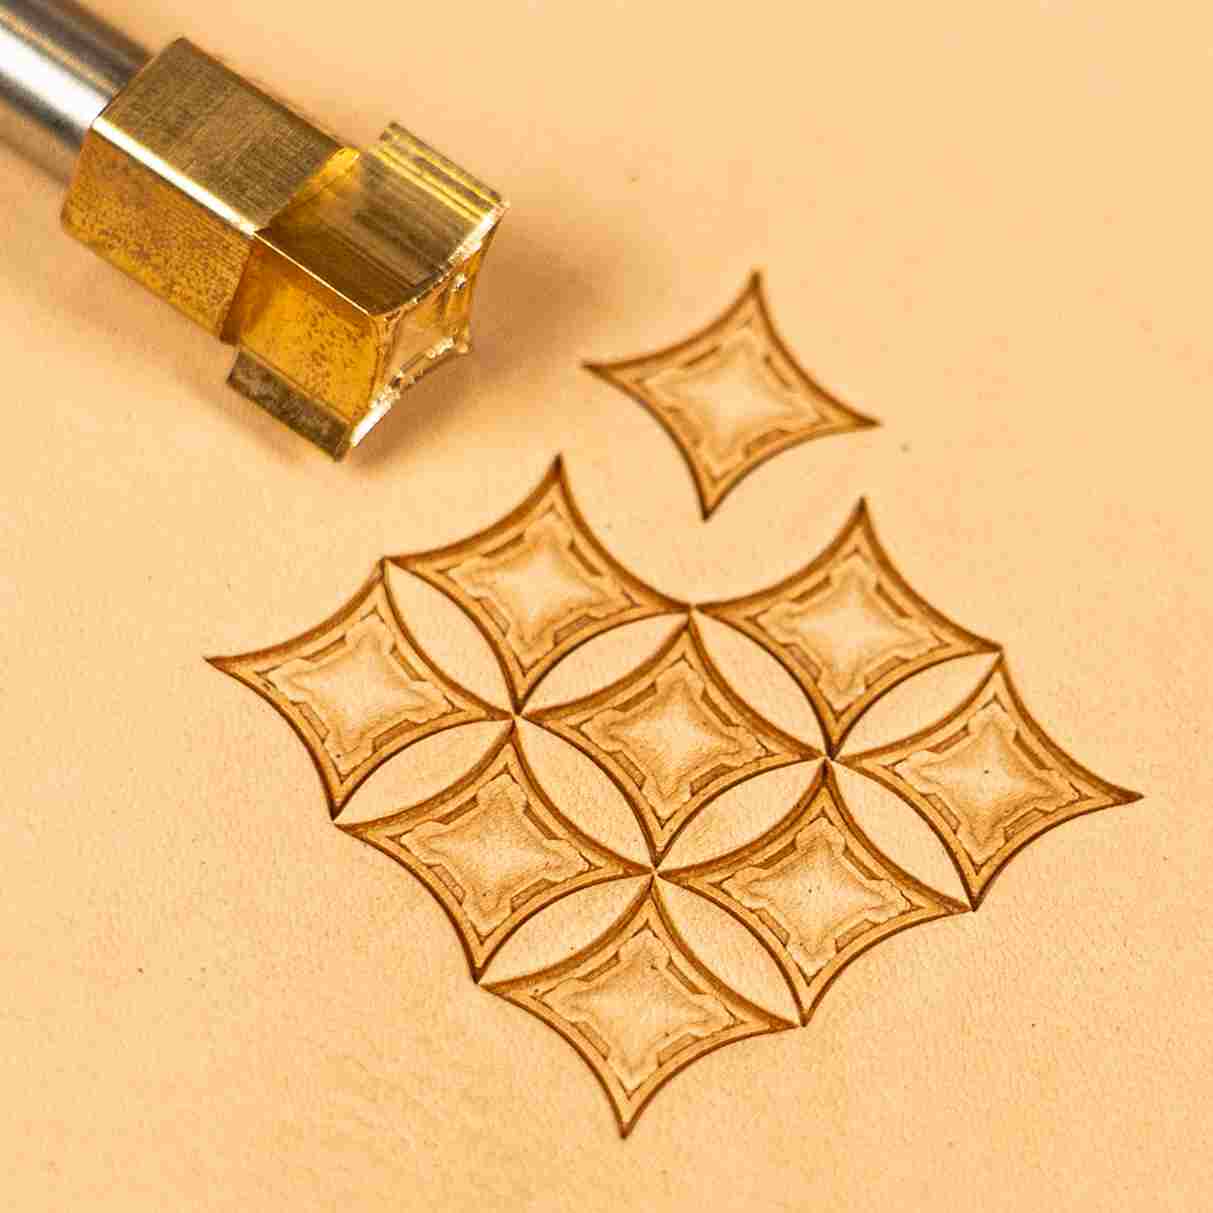 LT220 Premium Leather Stamping Tools for Professional Crafters - 15x15mm size